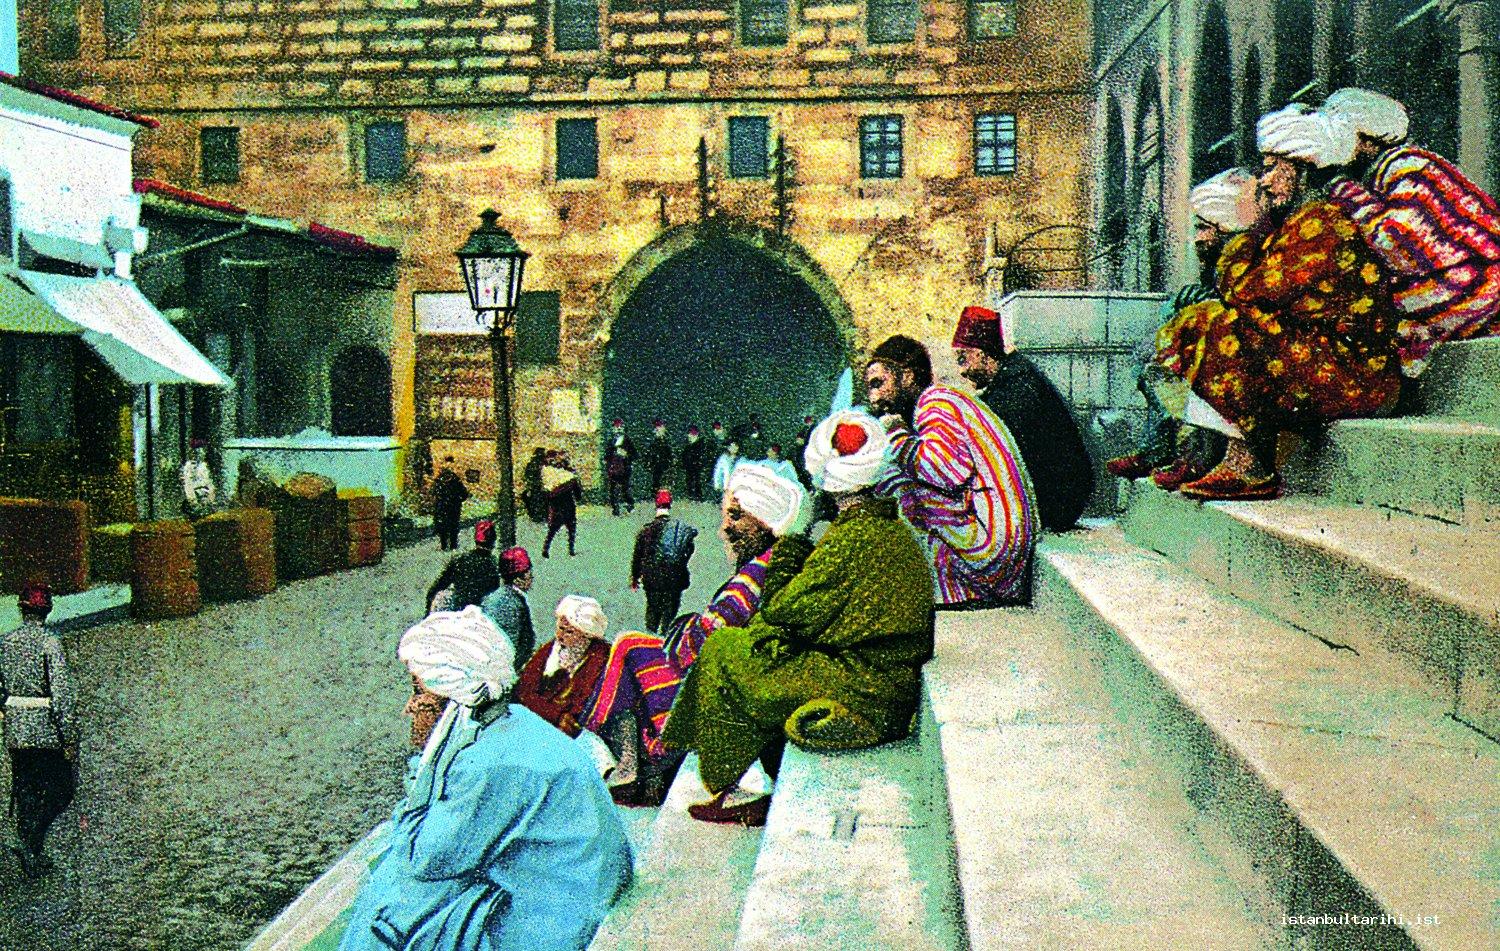 10- The Afghan, Turkmen, and Indian pilgrims resting on the steps of New Mosque (1908). During the period of Sultan Abdulhamid II, the pilgrims were encouraged to go to
    pilgrimage over Istanbul and meanwhile to visit the tombs, graves, mosques, and dervish lodges in Istanbul and thus to “connect” with Istanbul. This was one of the ways of
    building the idea of Istanbul-Caliphate in the new era. (İ. Kara)
    